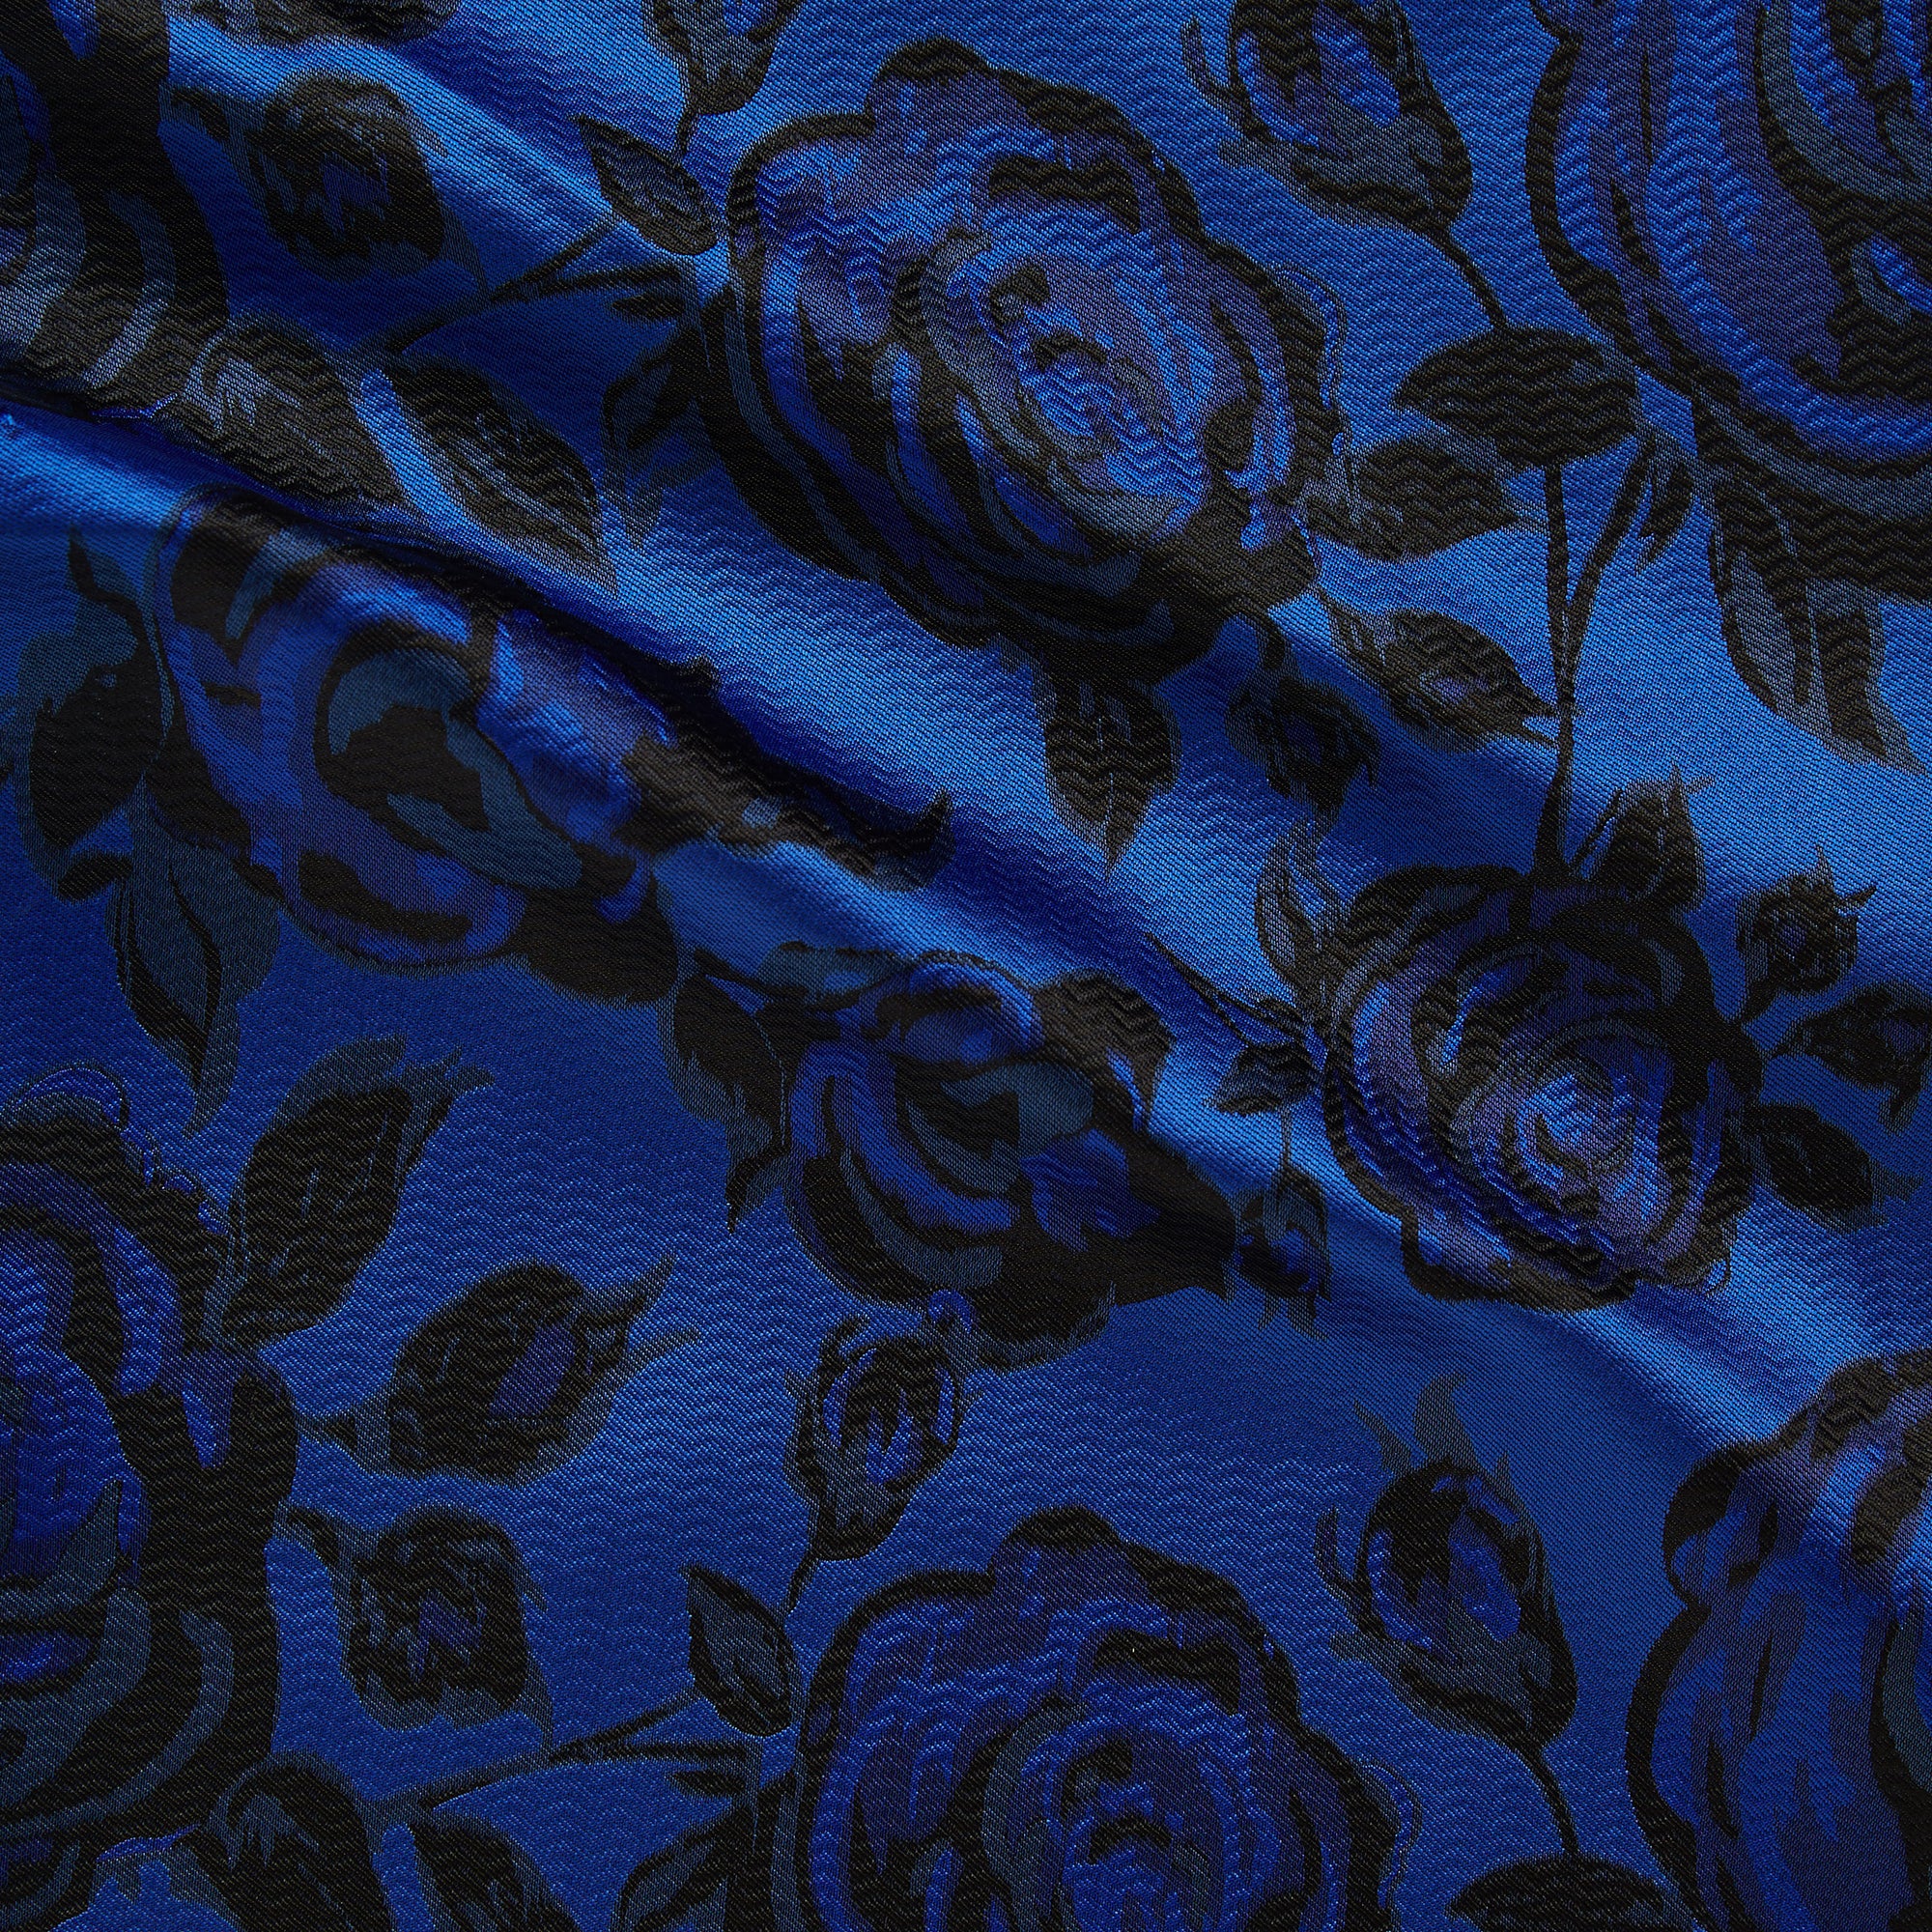 Displaying midnight rose with a blue base color polyester satin jacquard floral rose